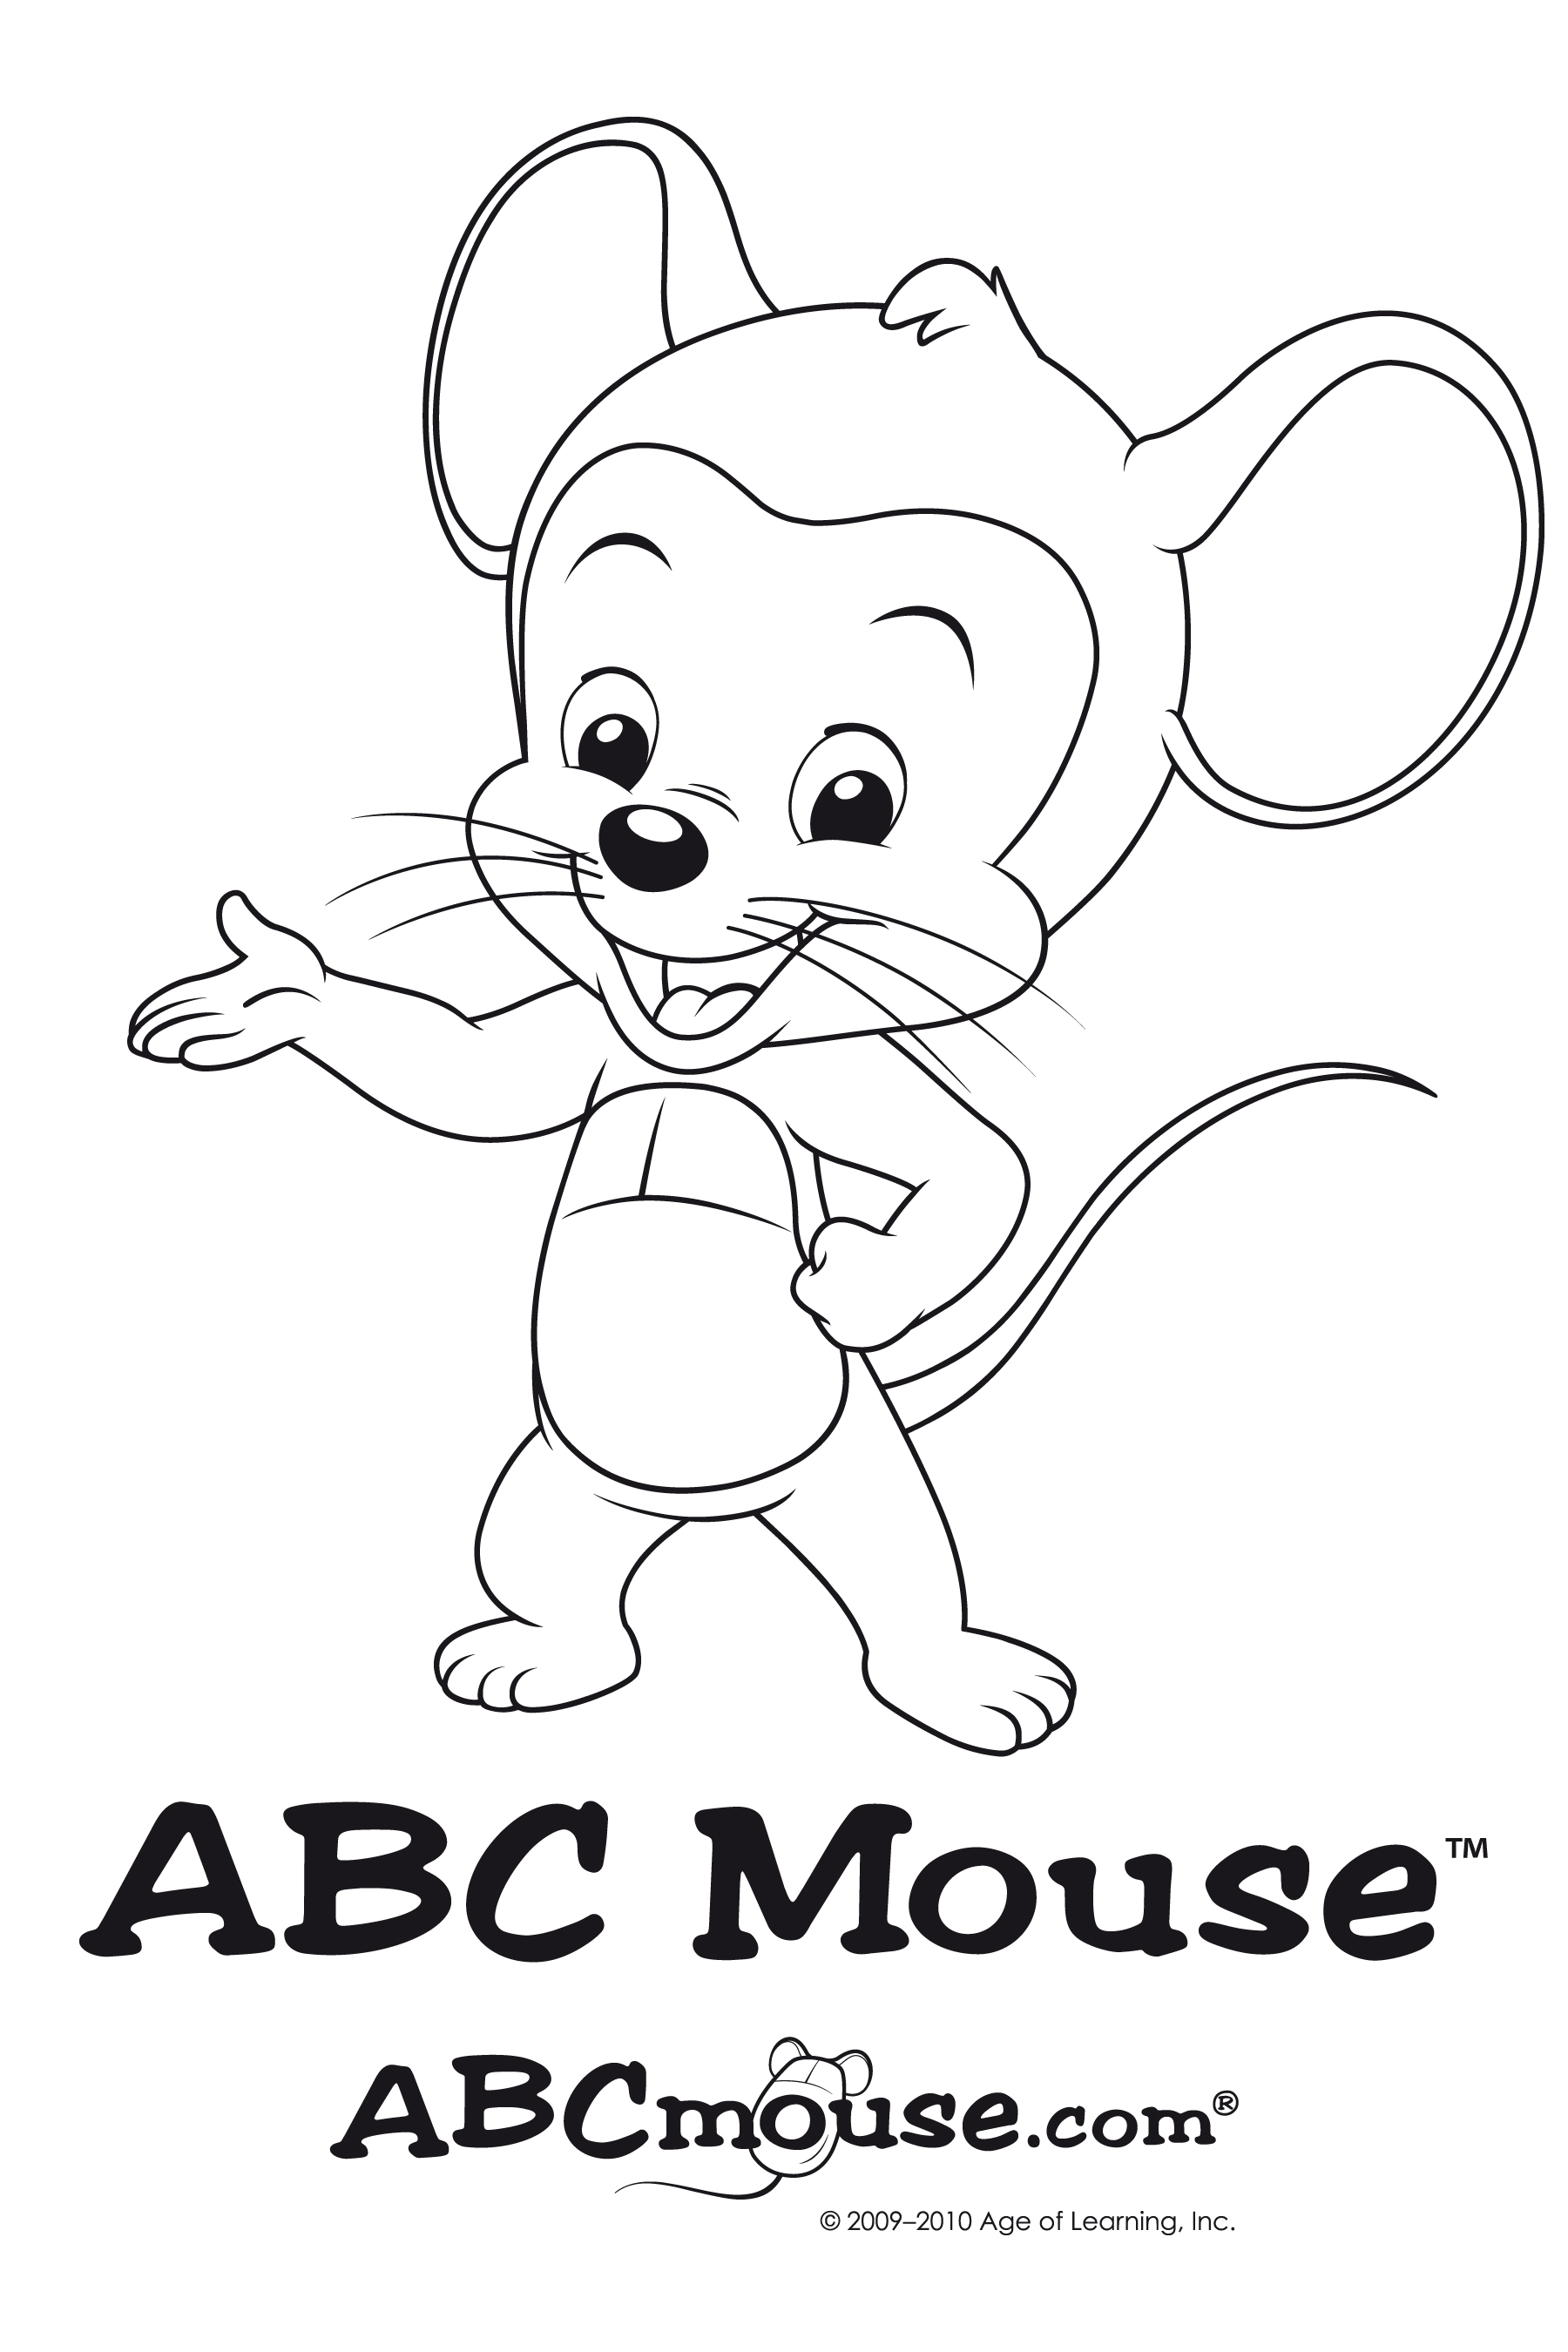 ABCmouse Assets Kids Learning, Phonics, Educational Games, Preschool